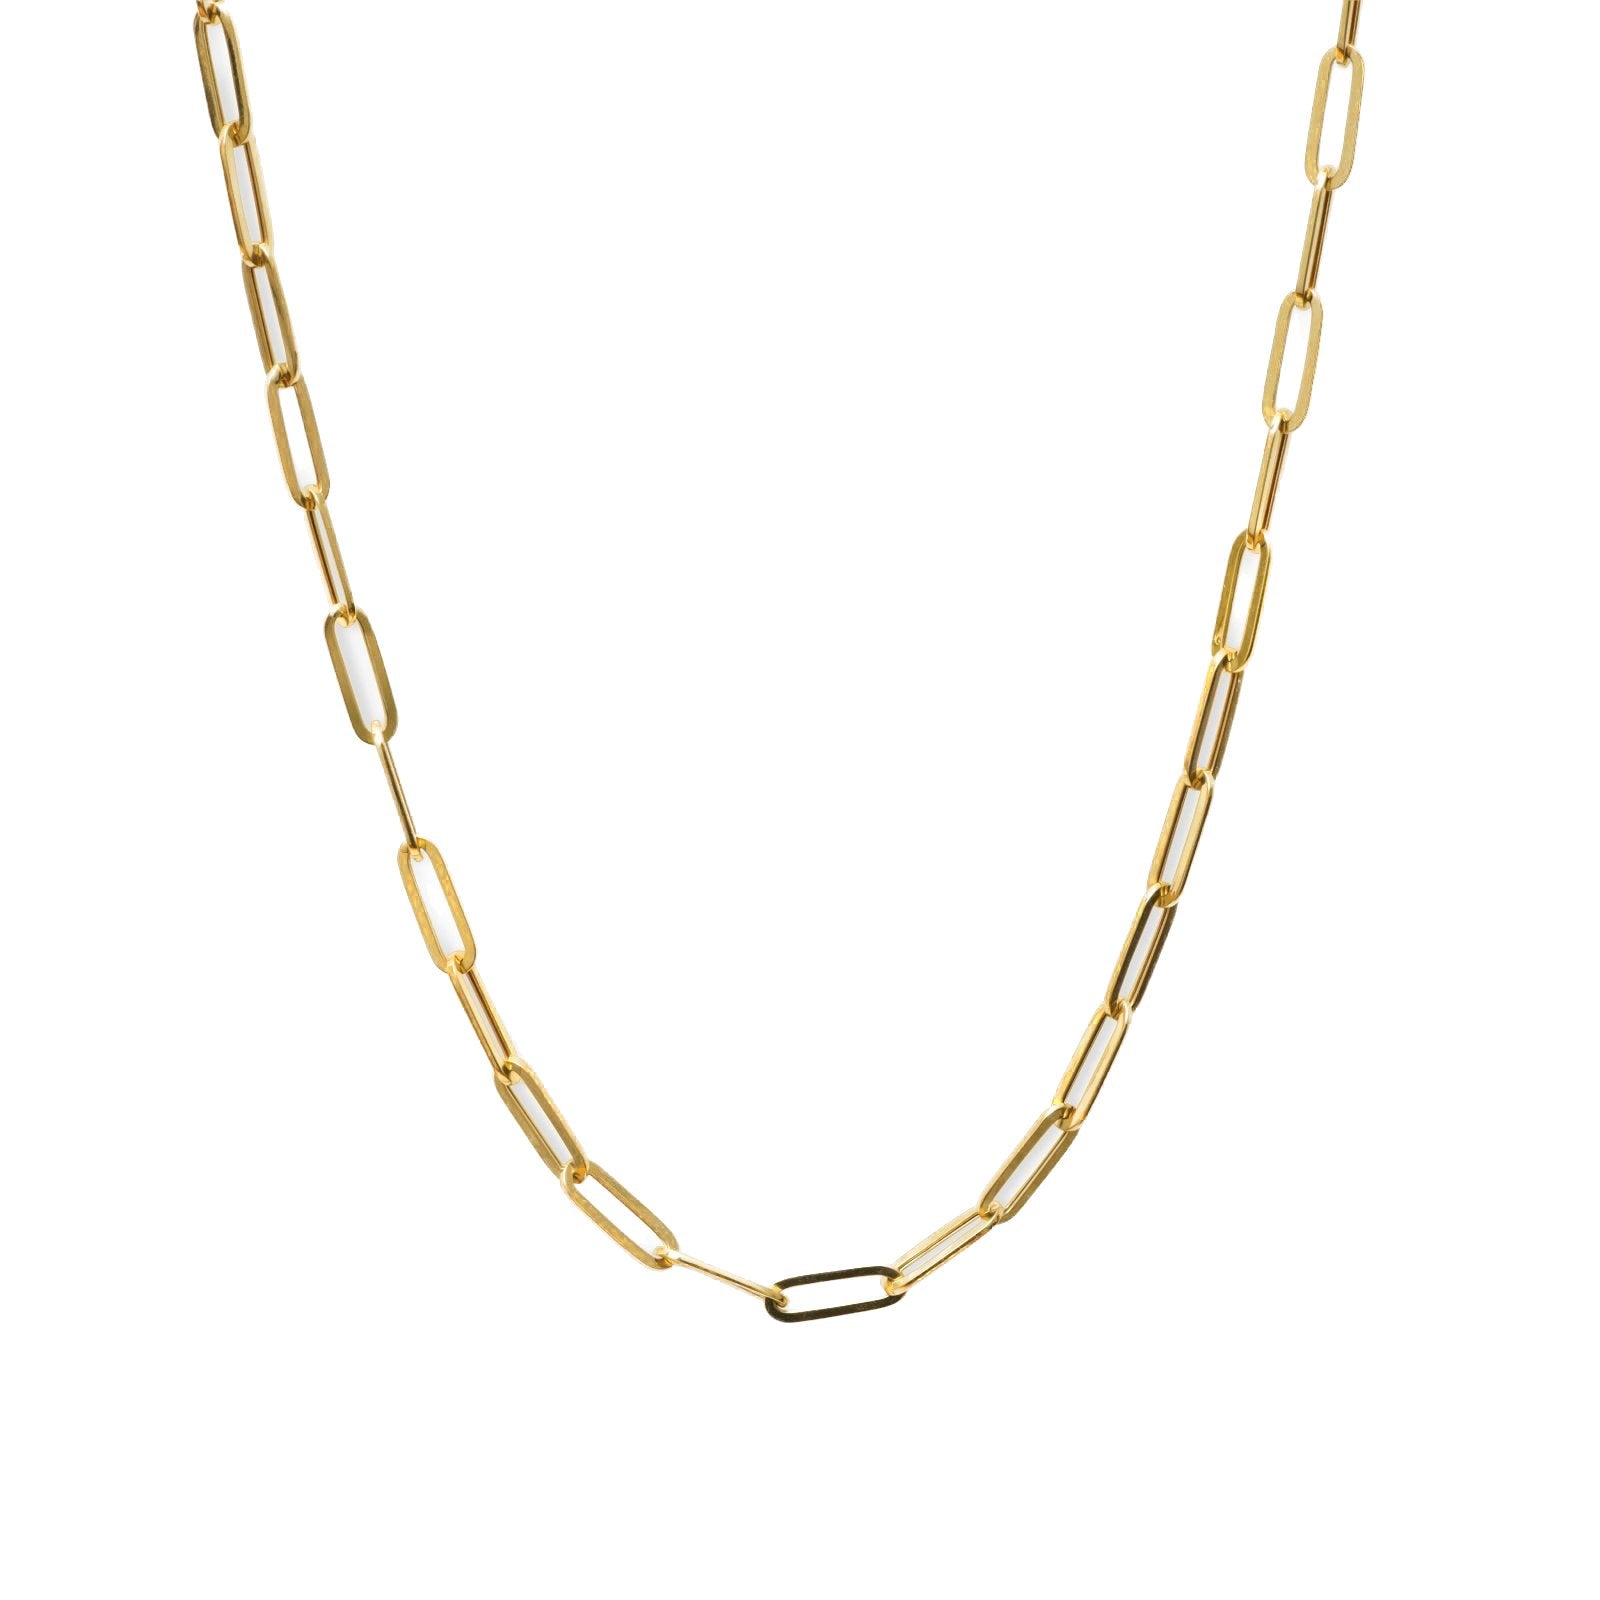 Classic Paperclip Chain Necklace Necklaces Estella Collection #product_description# 18188 14k Layering Necklace Make Collection #tag4# #tag5# #tag6# #tag7# #tag8# #tag9# #tag10# 16 Inches (2.75 mm)